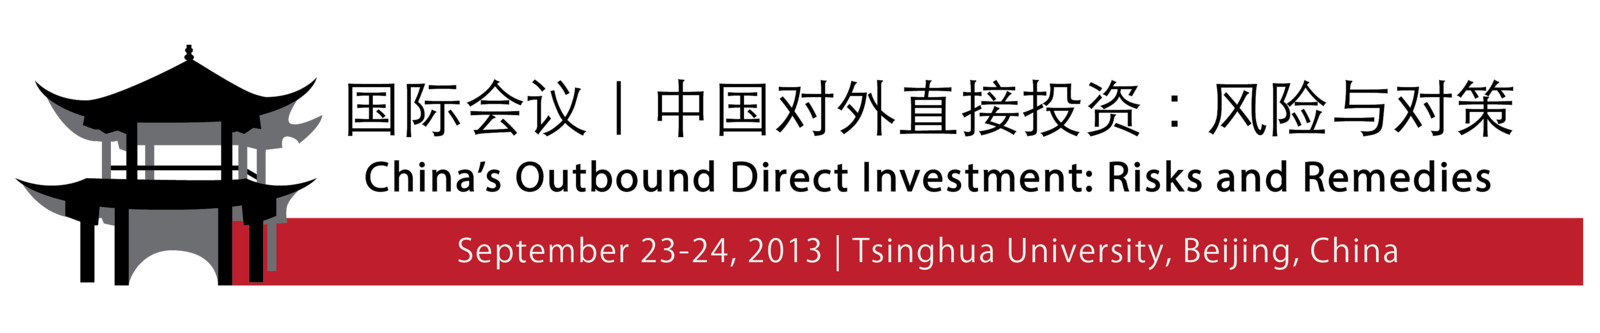 China's Outbound Direct Investment: Risks and Remedies. September 23-24, 2013. Tsinghua University, Beijing, China